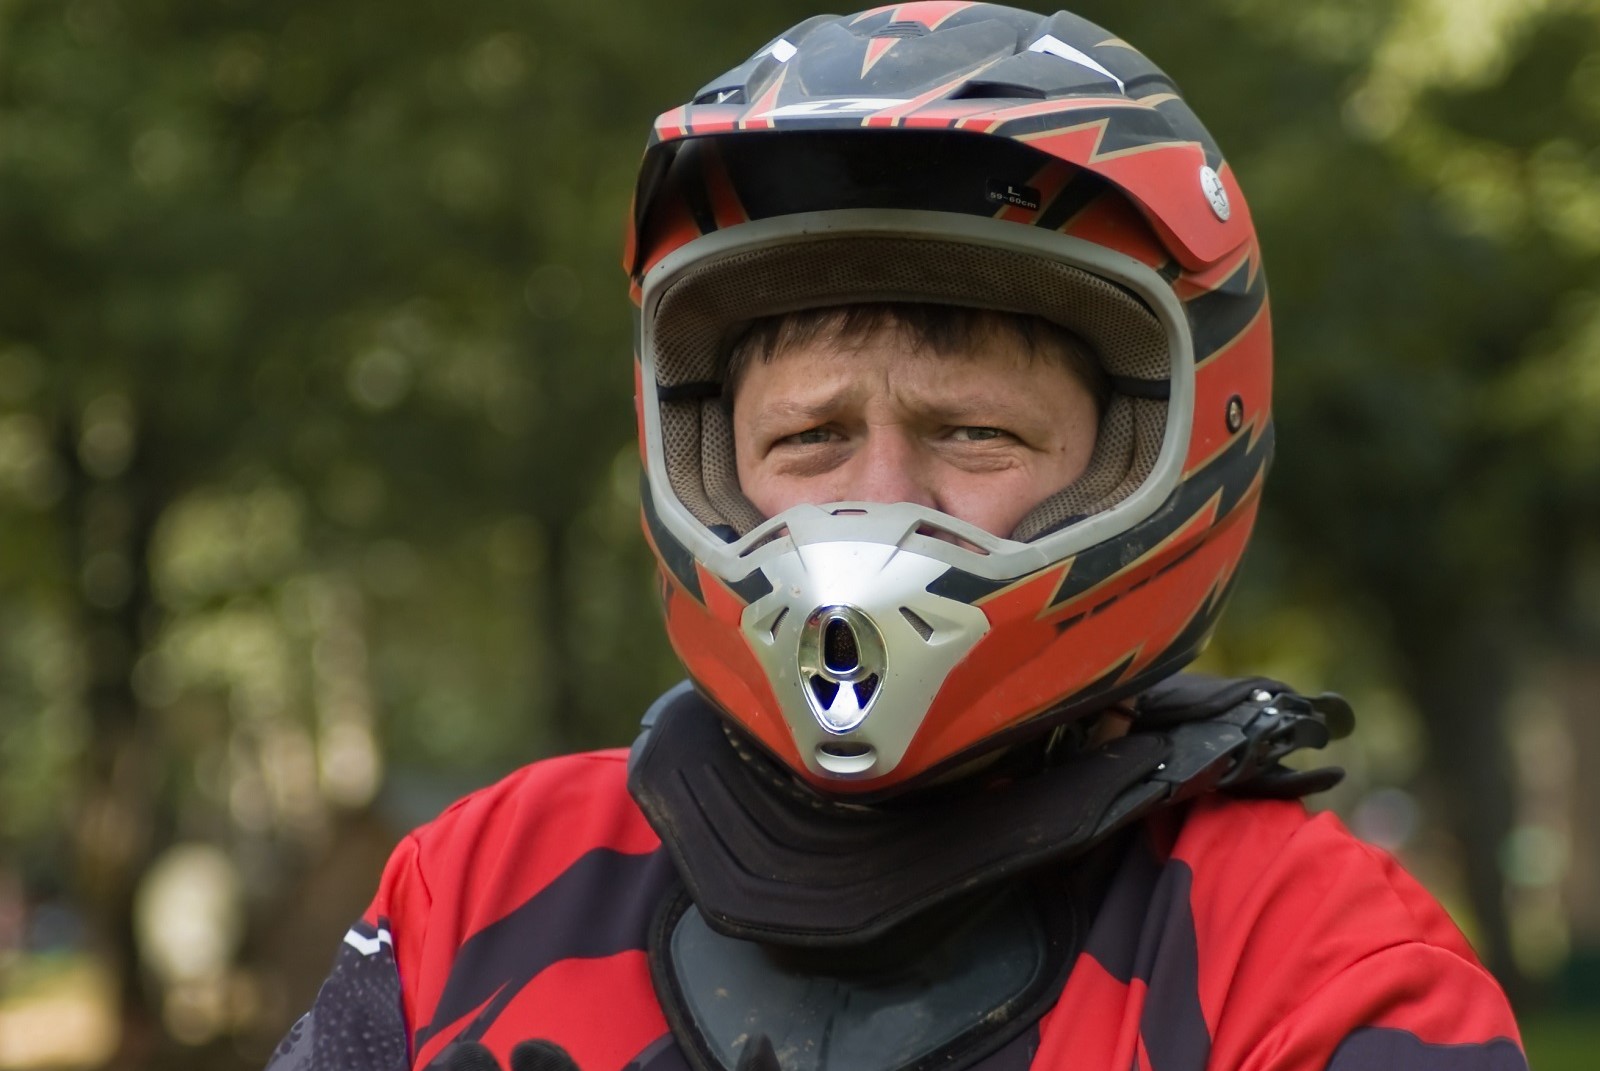 <p class="wp-caption-text">Image Credit: Shutterstock / Gina Callaway</p>  <p><span>A neck brace can prevent severe neck injuries by limiting head movement during a crash. It’s especially important for off-road and adventure riders.</span></p>